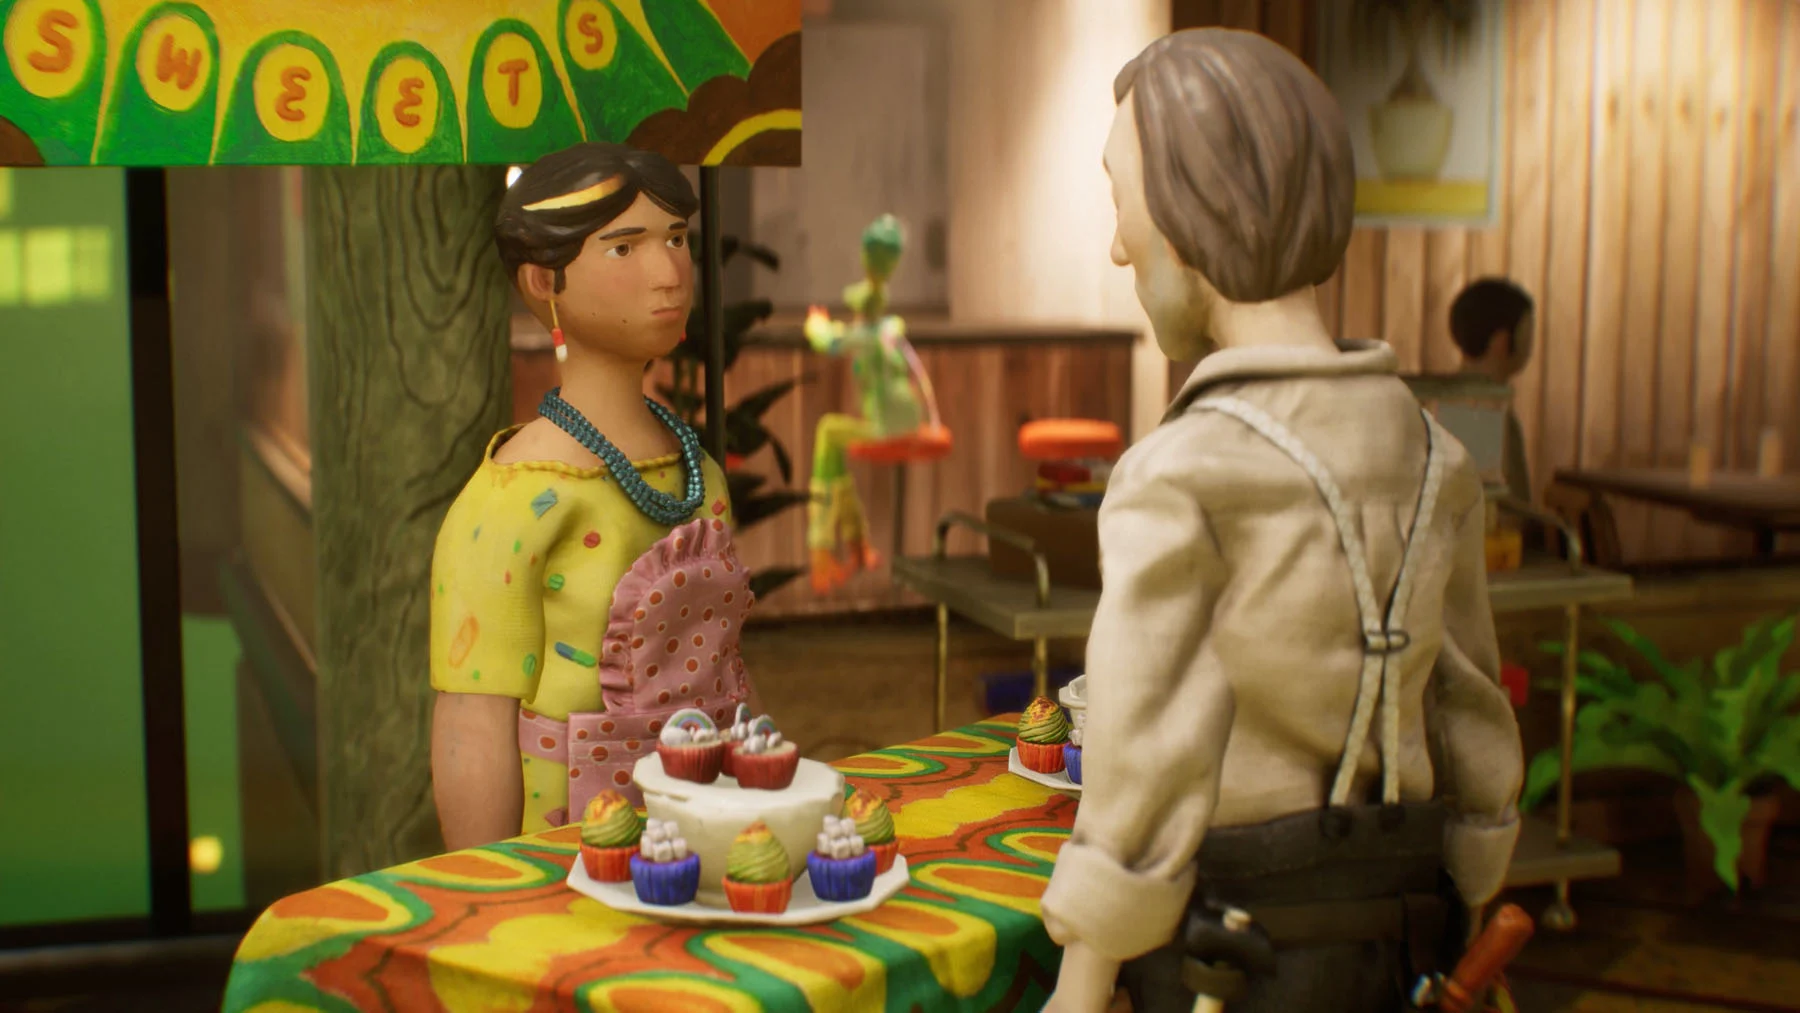 A still from the handmade video game Harold Halibut. The still shows a man and a woman talking over a table that holds a plate of cupcakes.